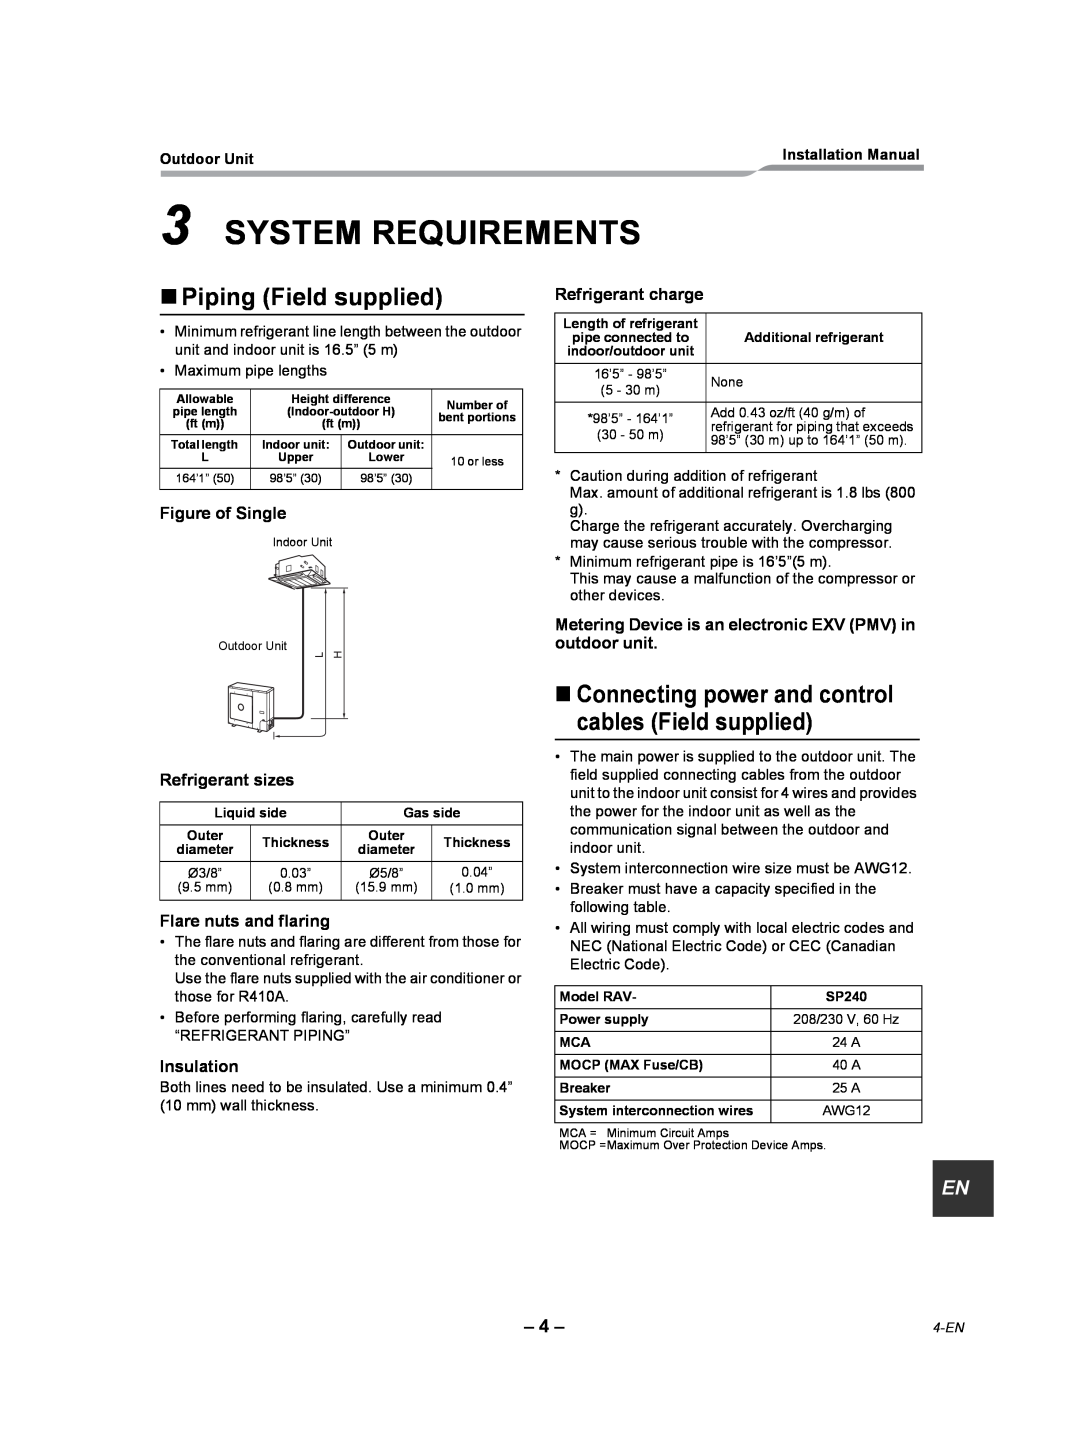 Toshiba RAV-SP240AT2-UL System Requirements, „Piping Field supplied, Figure of Single, Refrigerant sizes, Insulation 